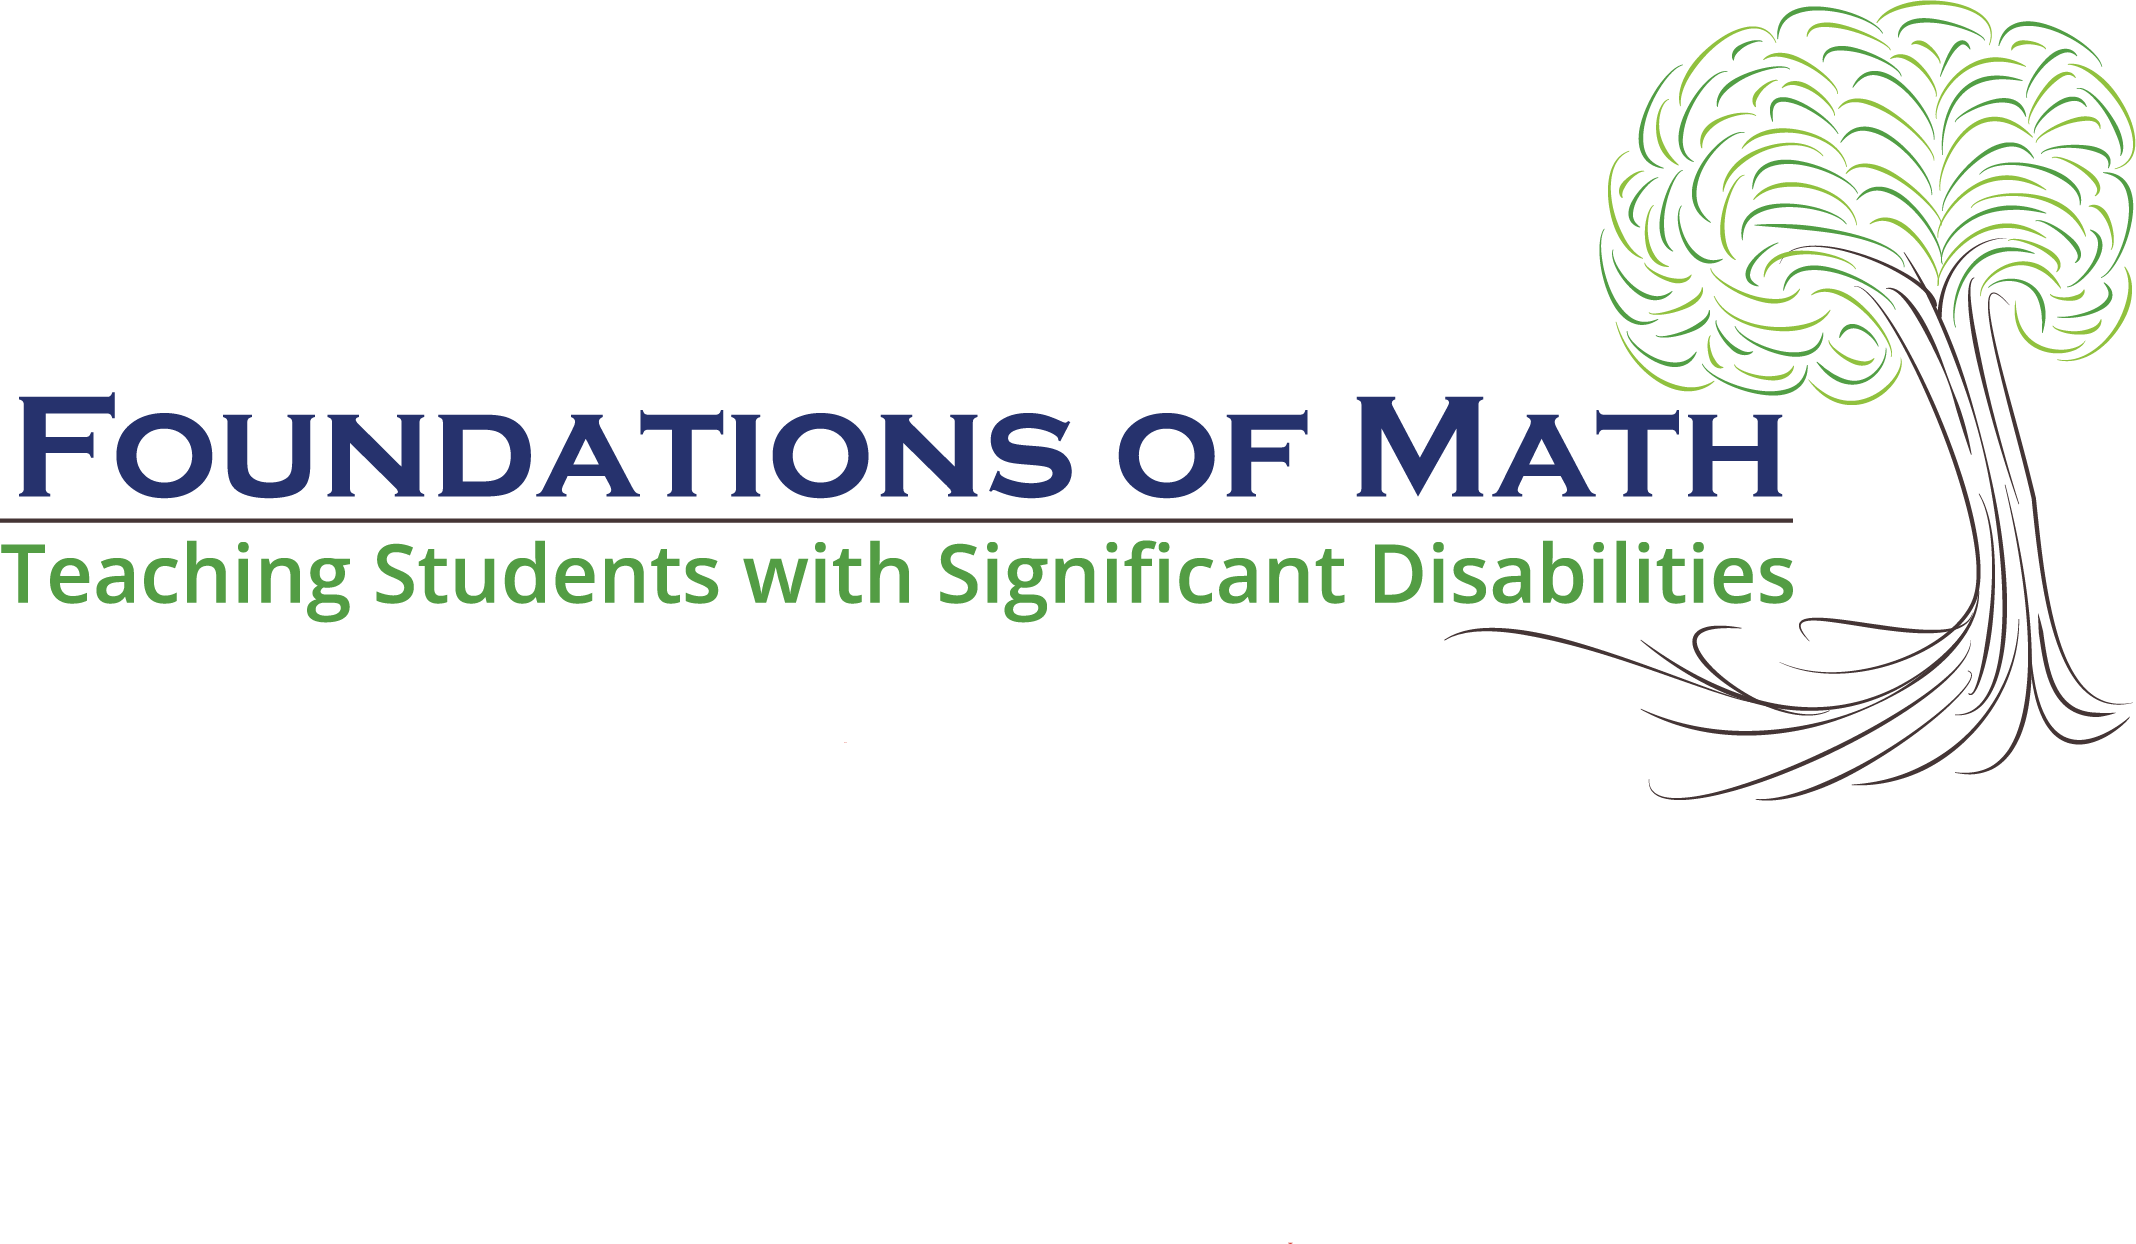 Foundations of Math: Teaching Students with Significant Disabilities